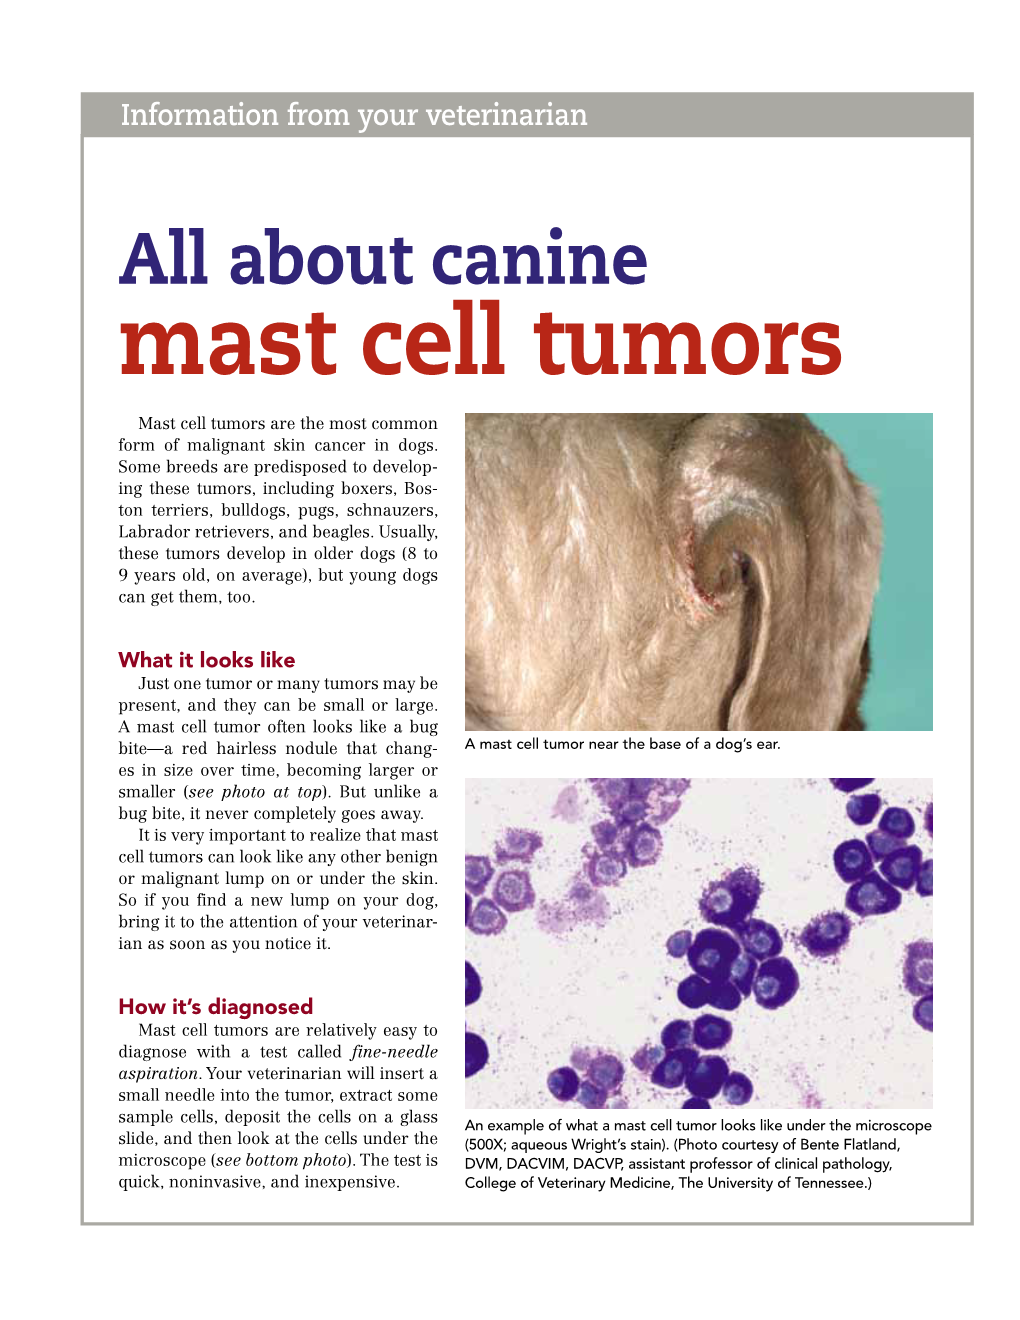 Mast Cell Tumors Mast Cell Tumors Are the Most Common Form of Malignant Skin Cancer in Dogs